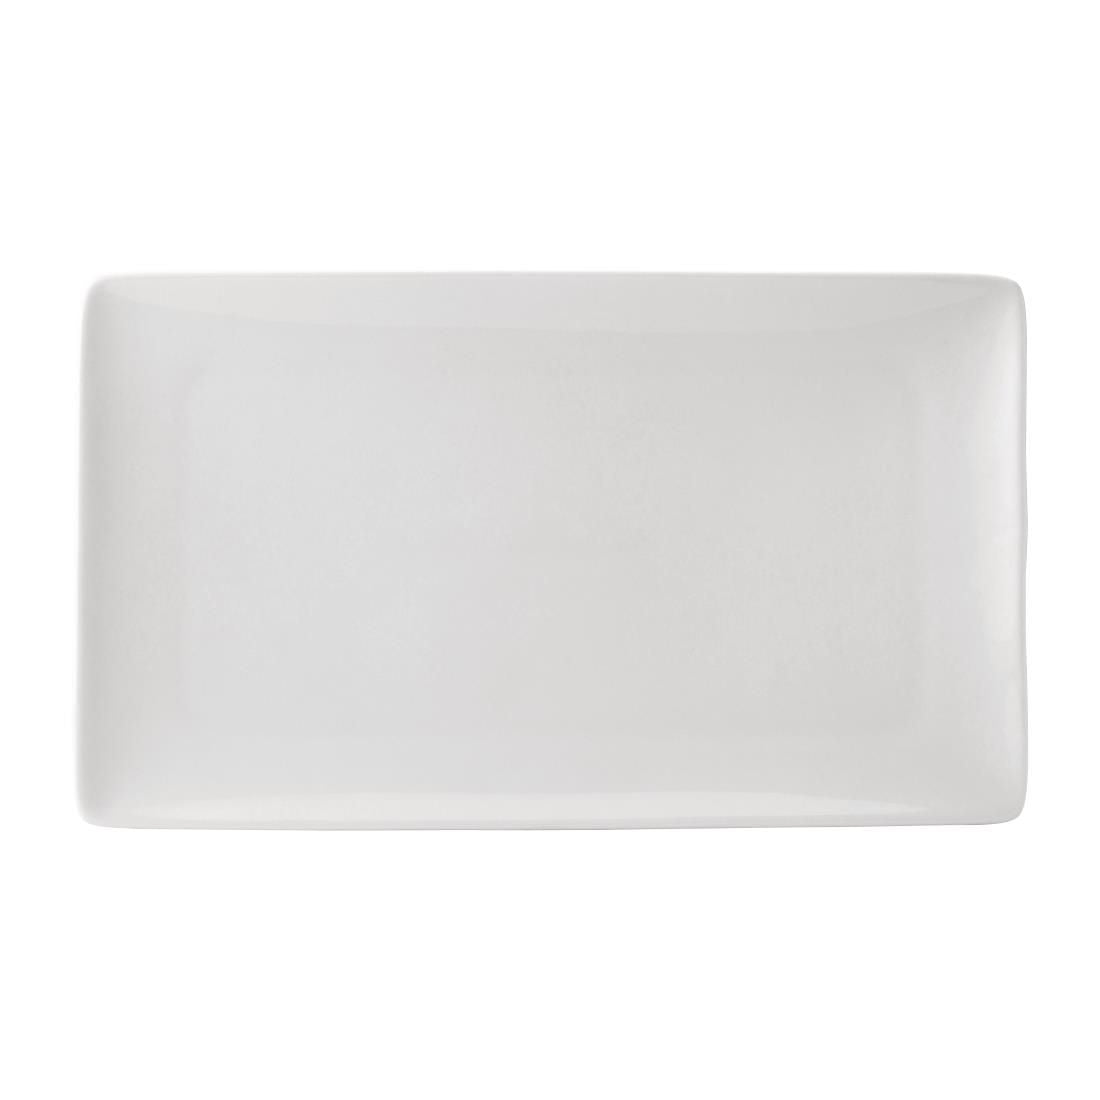 CY462 Utopia Pure White Rectangular Plates 210 x 350mm (Pack of 6) JD Catering Equipment Solutions Ltd